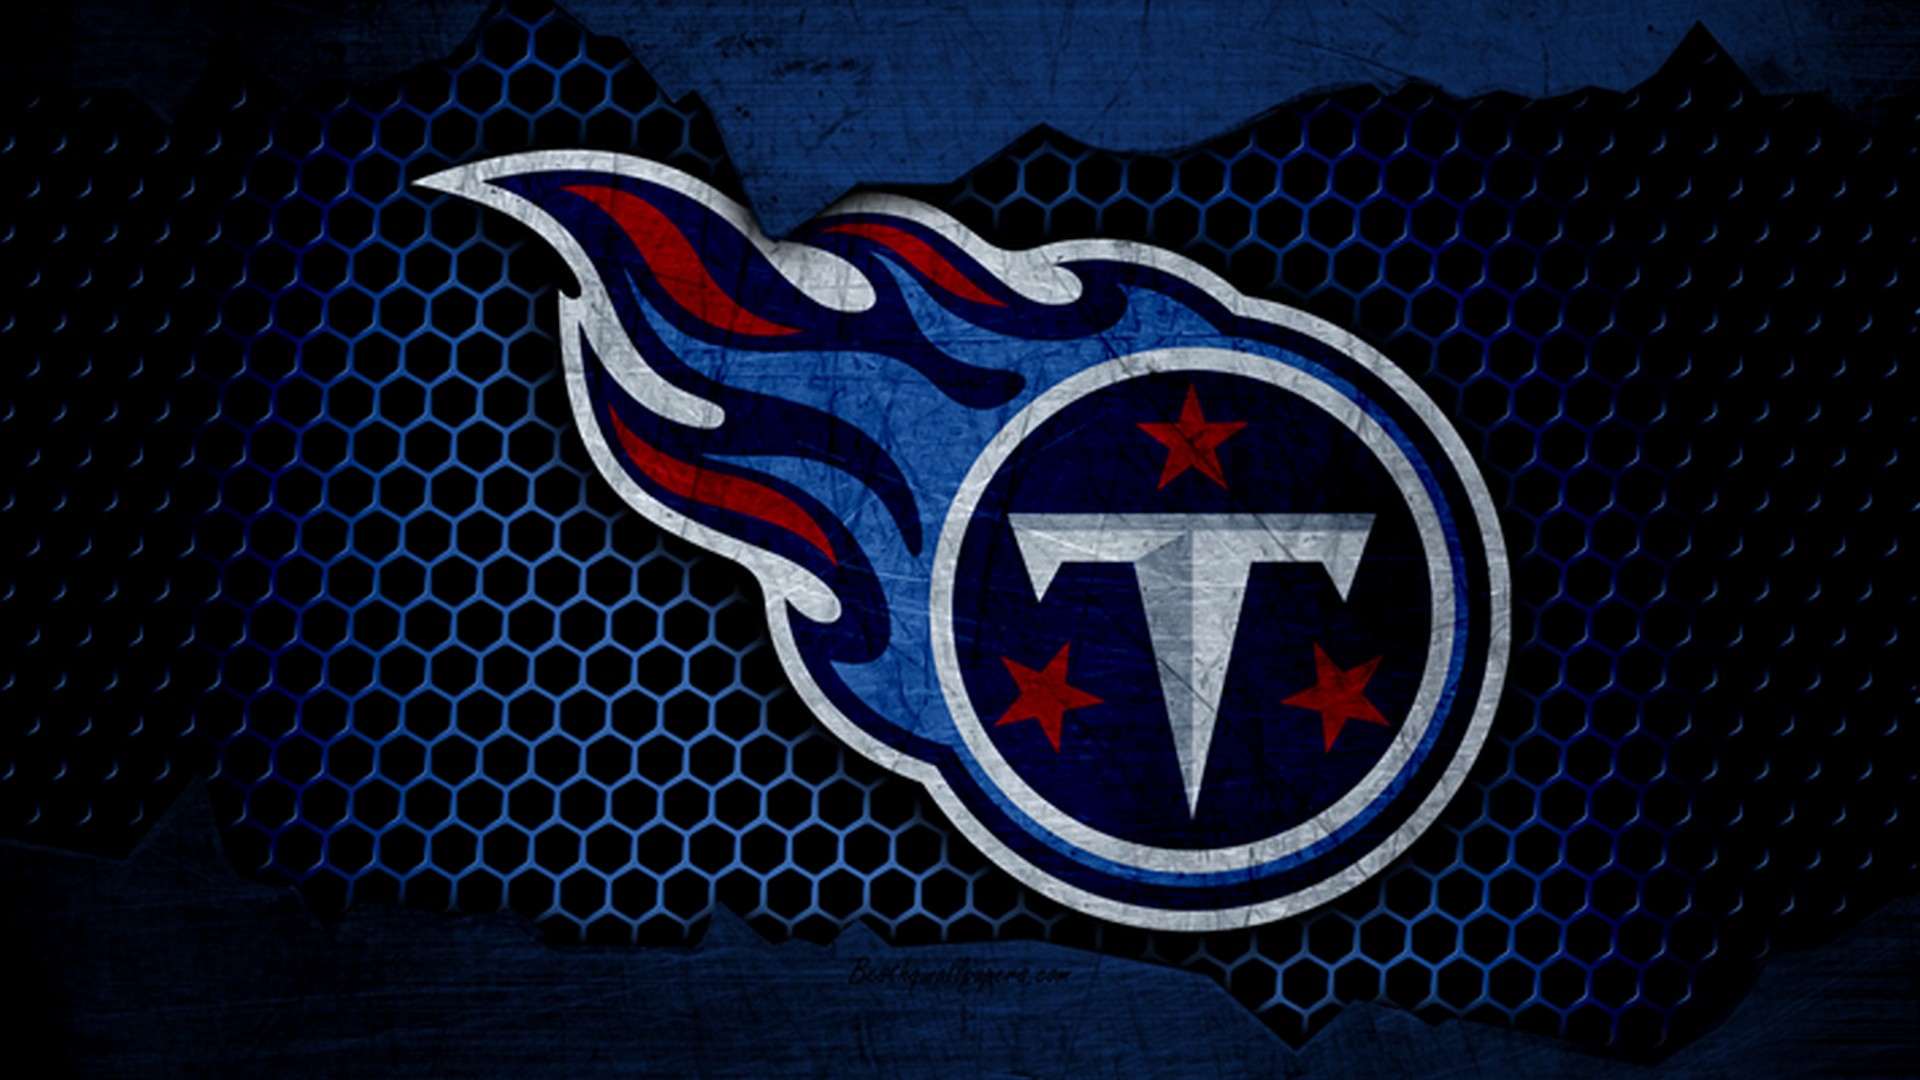 HD Desktop Wallpaper Tennessee Titans With high-resolution 1920X1080 pixel. You can use this wallpaper for your Mac or Windows Desktop Background, iPhone, Android or Tablet and another Smartphone device